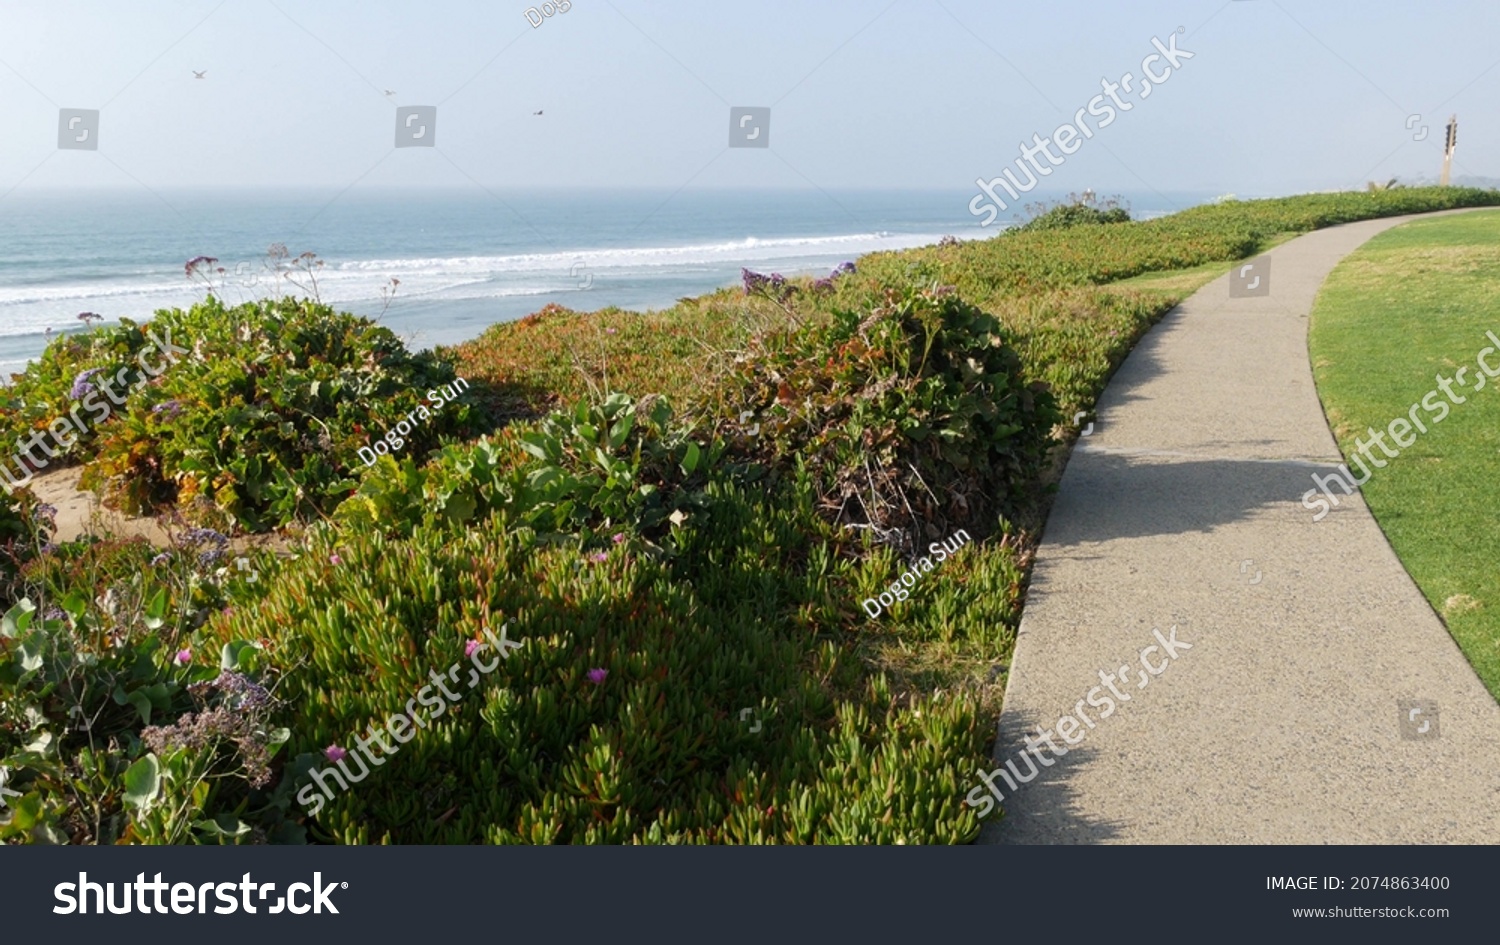 Seagrove recreation beach park in Del Mar, California USA. Seaside garden with lawn in waterfront resort. Green grass and ocean coast view from above. Picturesque coastline vista point on steep hill. #2074863400